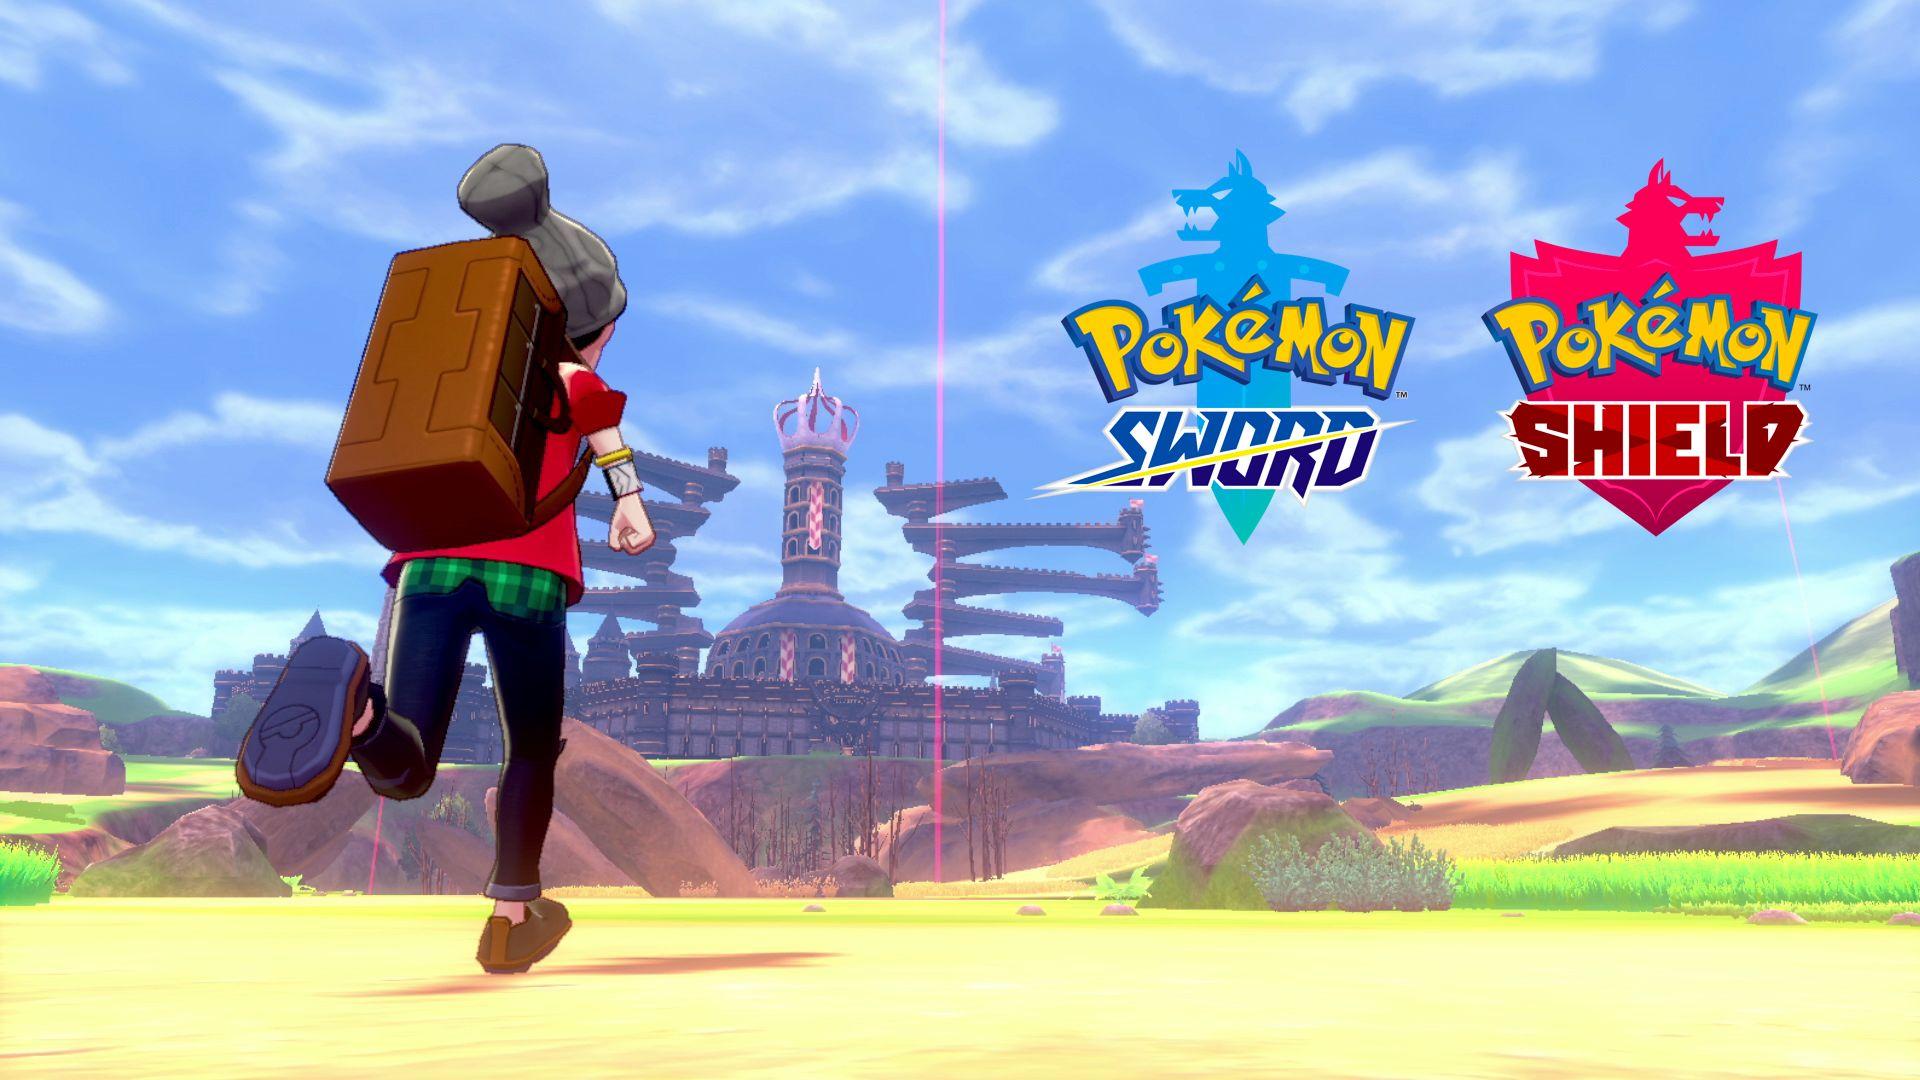 Pokemon Sword and Shield Introduces Gigantamaxing With New Trailer